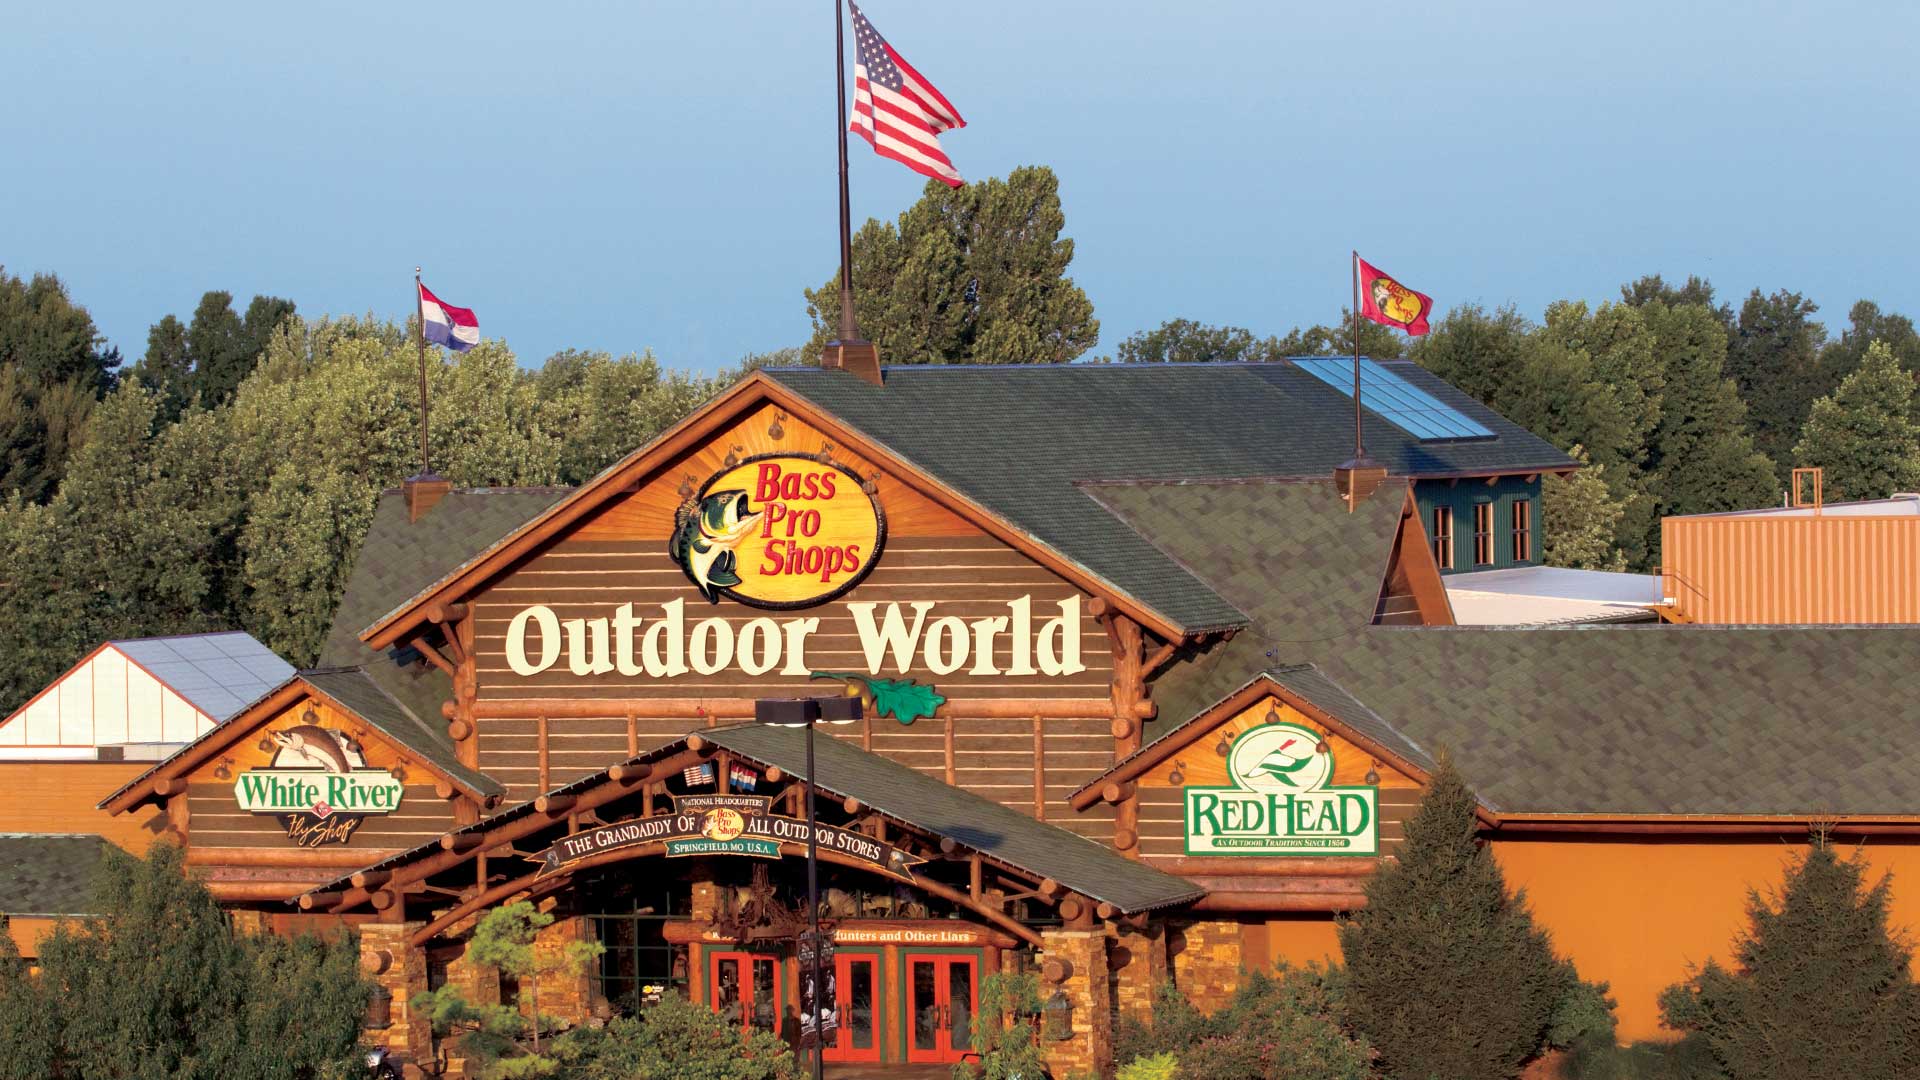 During COVID-19 Outbreak, Bass Pro Shops Manages Operations with